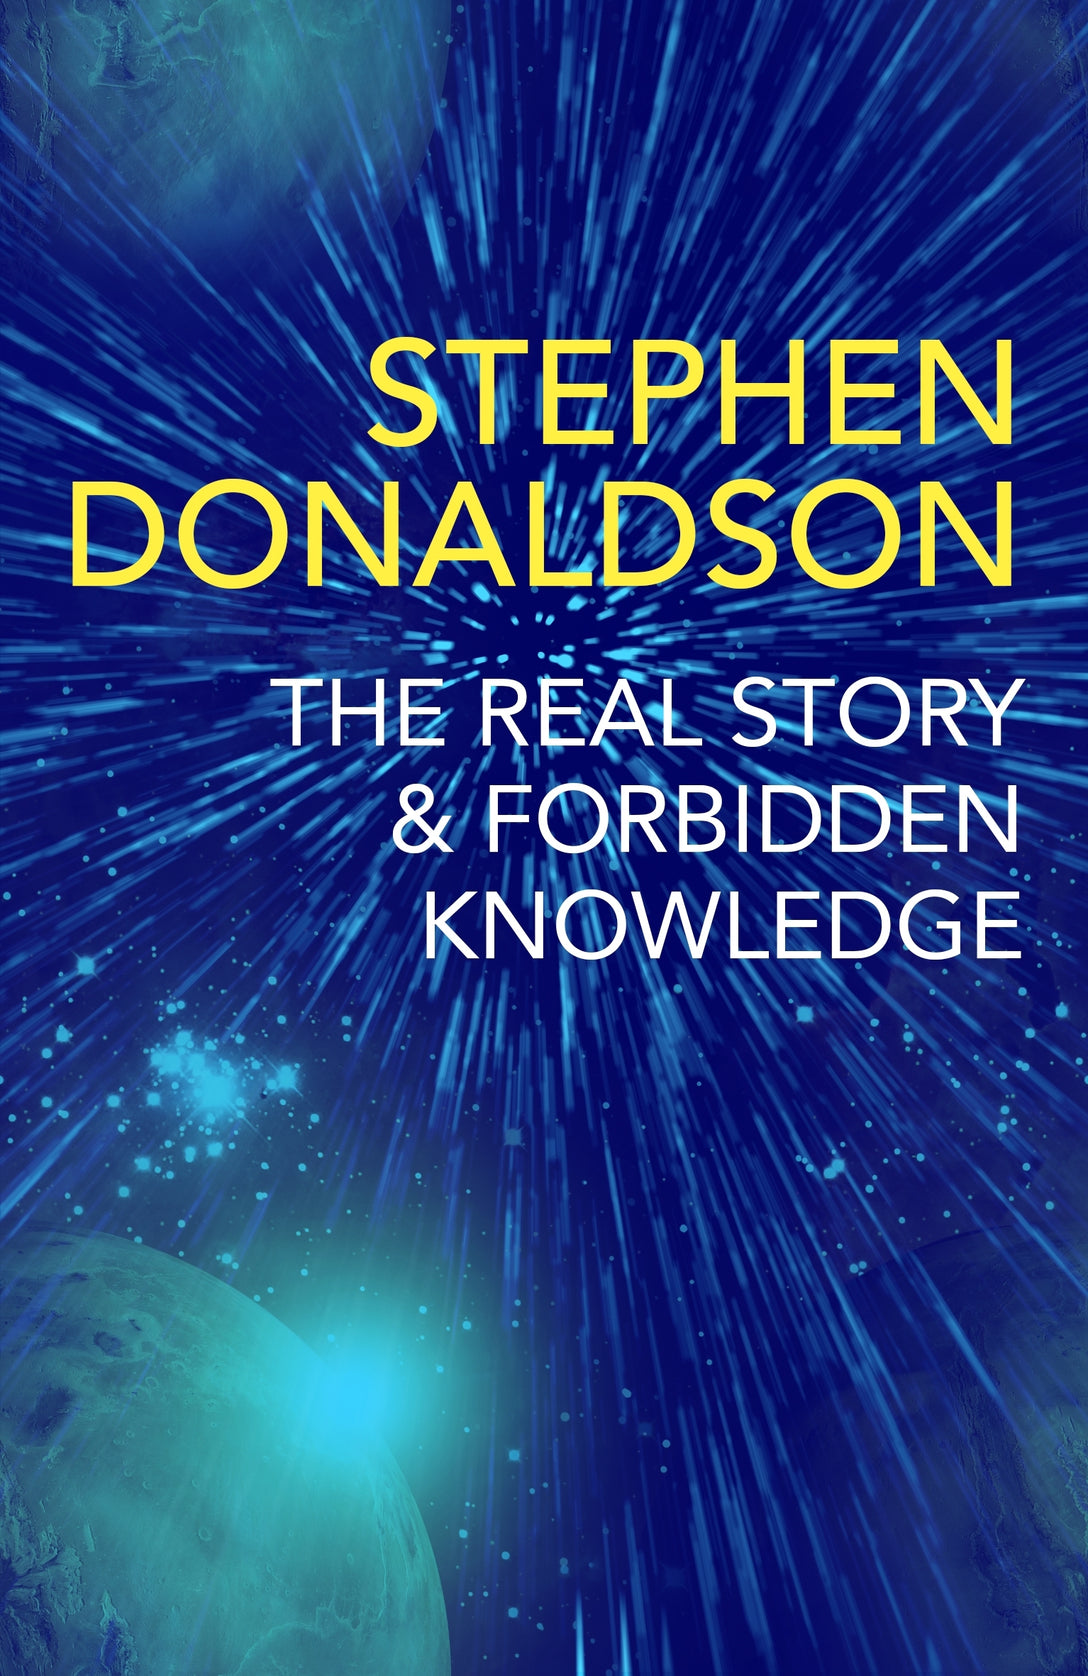 The Real Story & Forbidden Knowledge by Stephen Donaldson